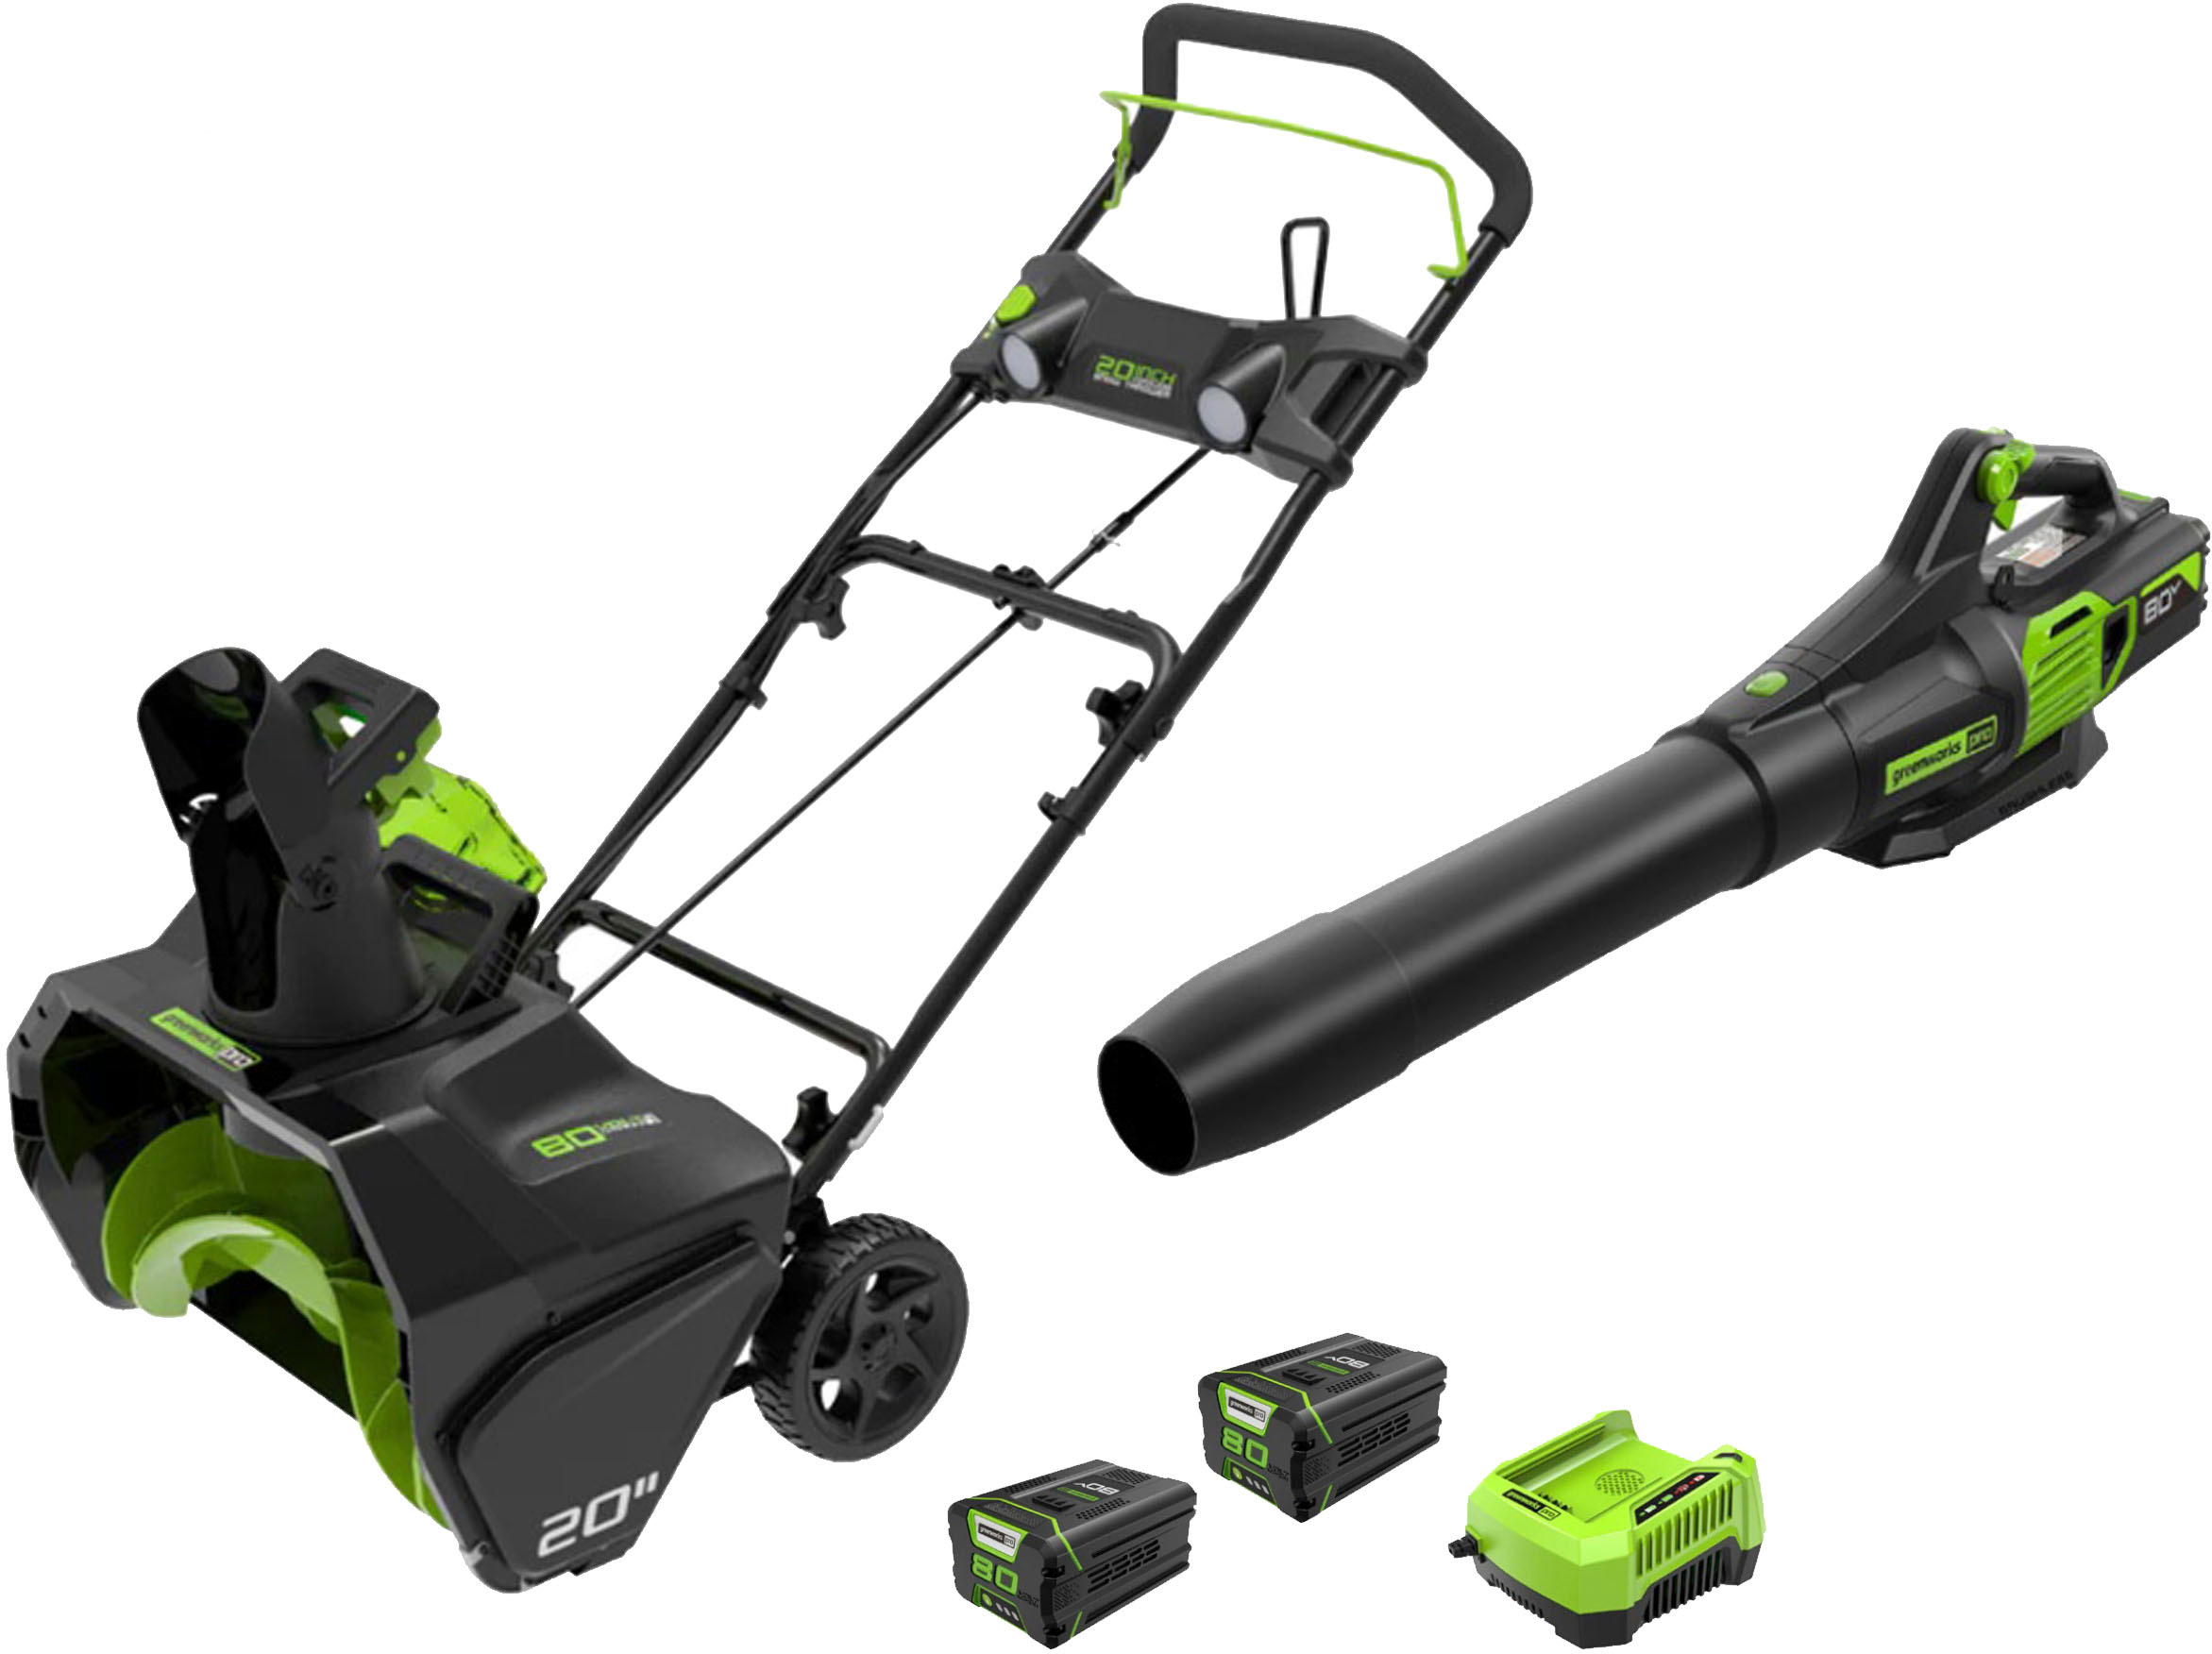 Greenworks 80V 22” Cordless Brushless Snow Blower with 4.0 Ah Battery and  Rapid Charger Black/Green 2605902 - Best Buy